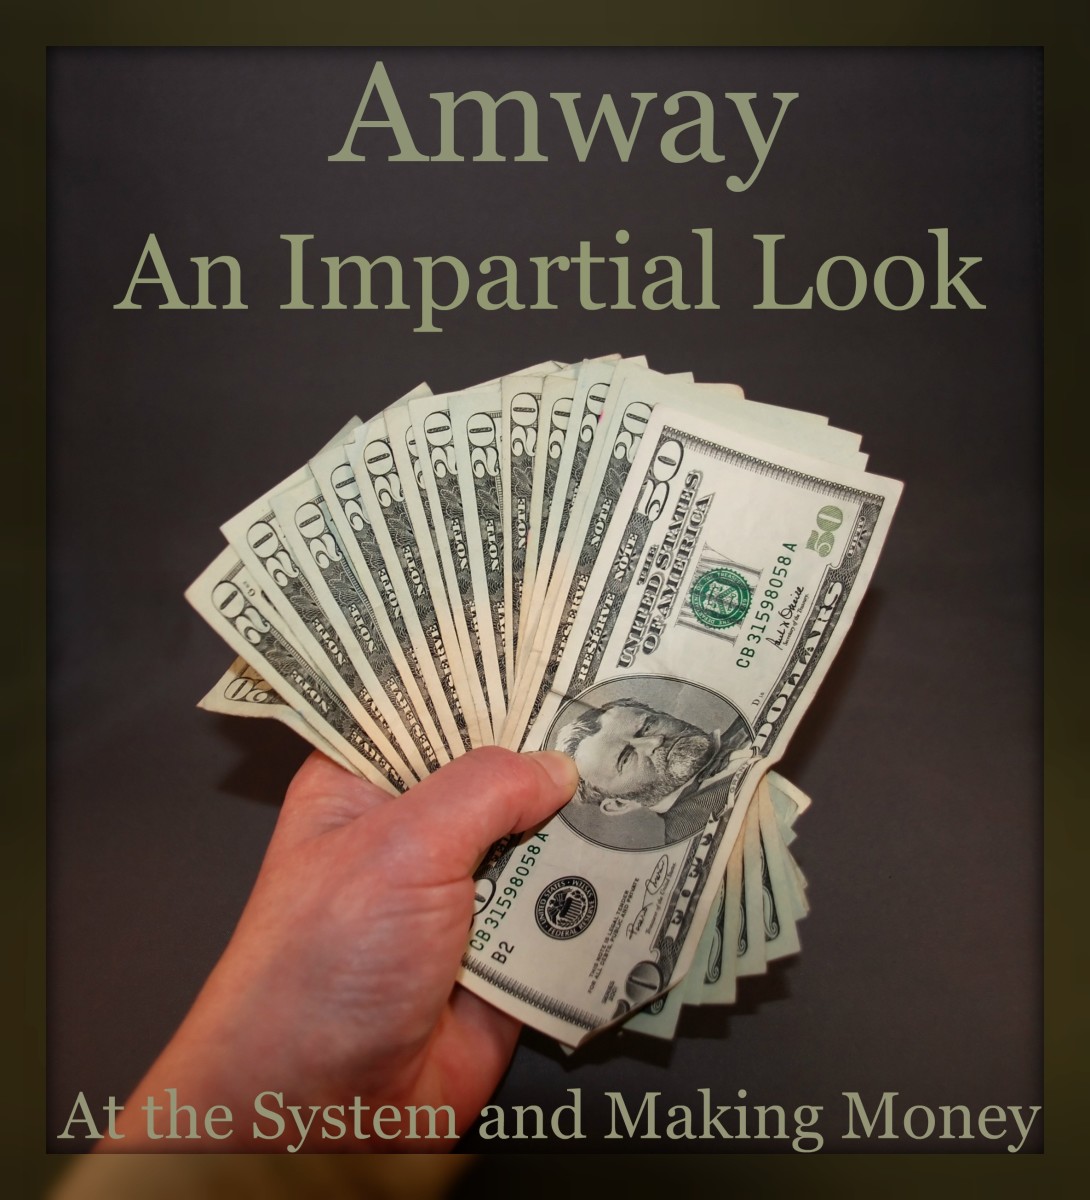 Amway review - this is not an Amway plug.